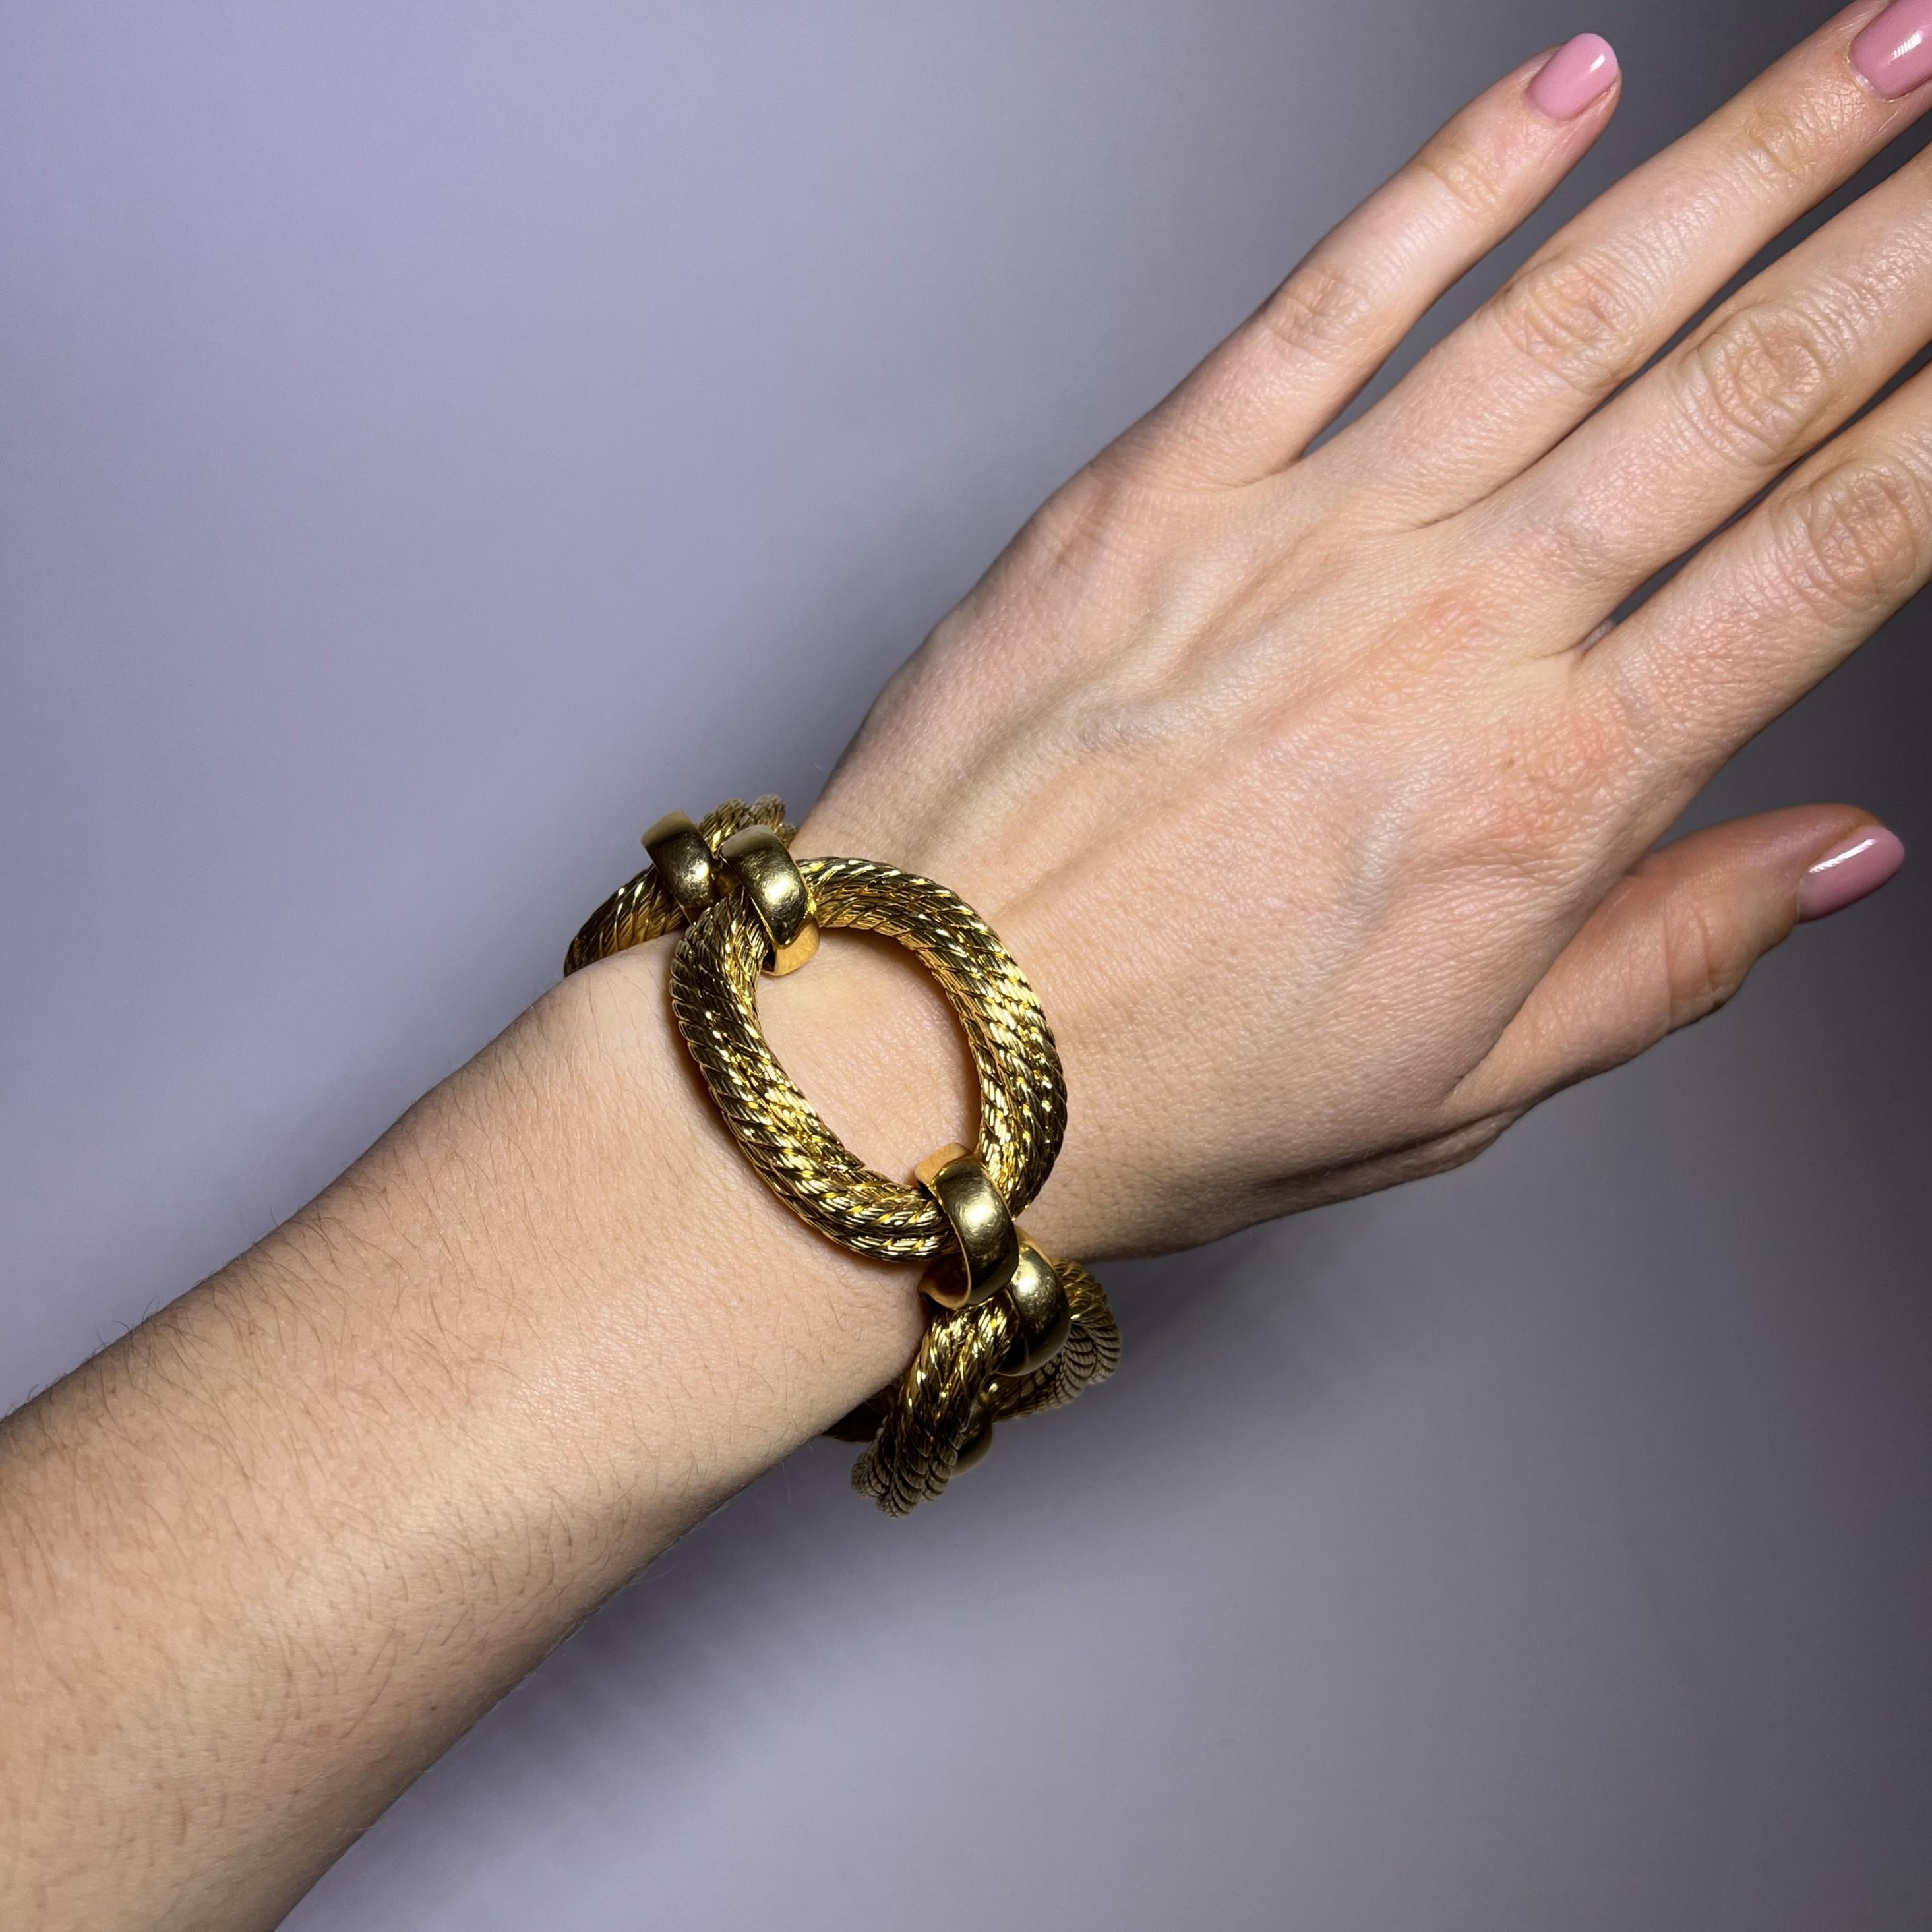 Statement Chain Bracelet in 18 Karat Yellow Gold  In Good Condition For Sale In Lucerne, CH